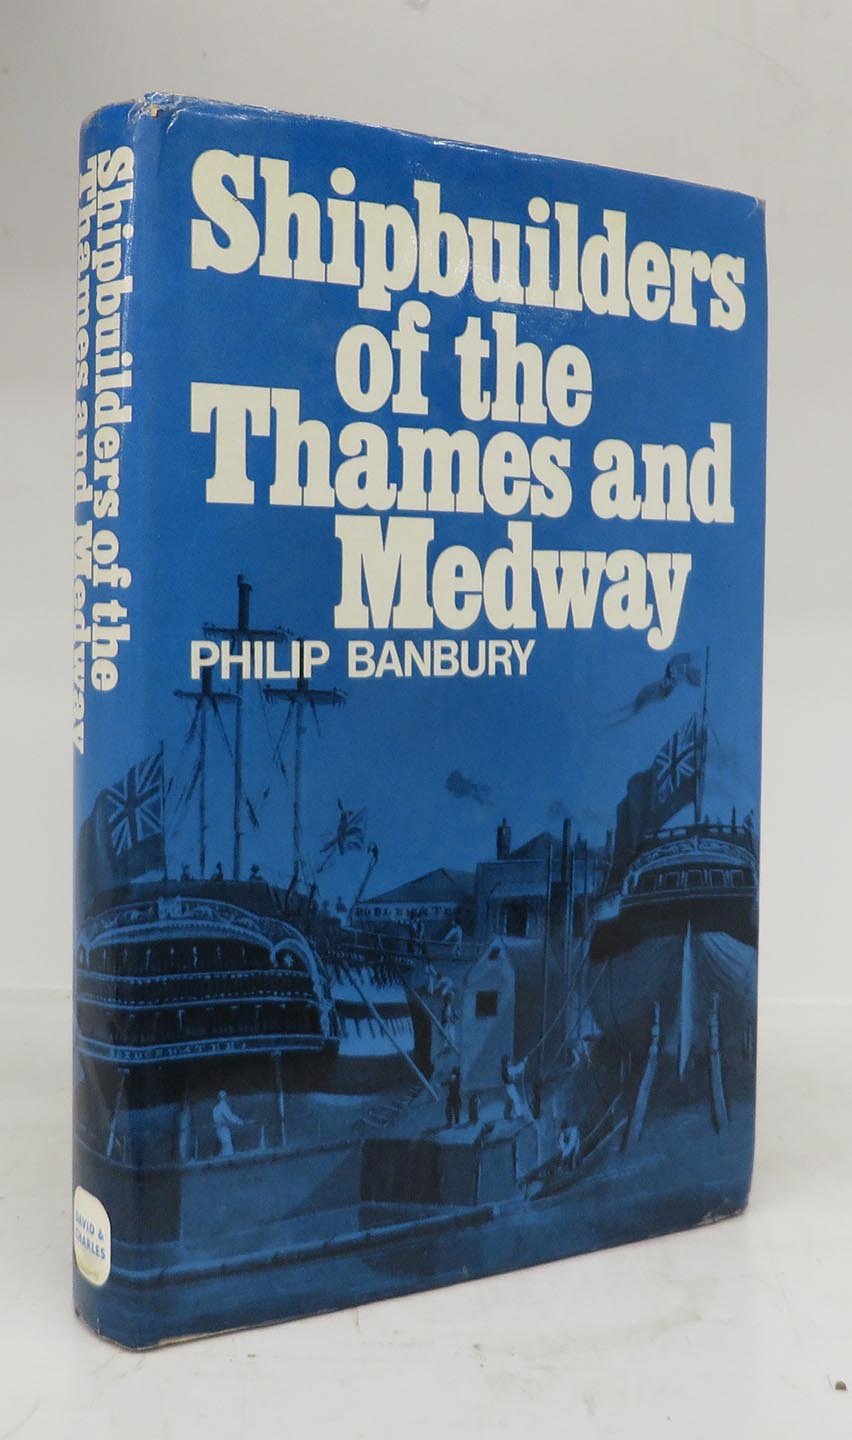 Shipbuilders of the Thames and Medway